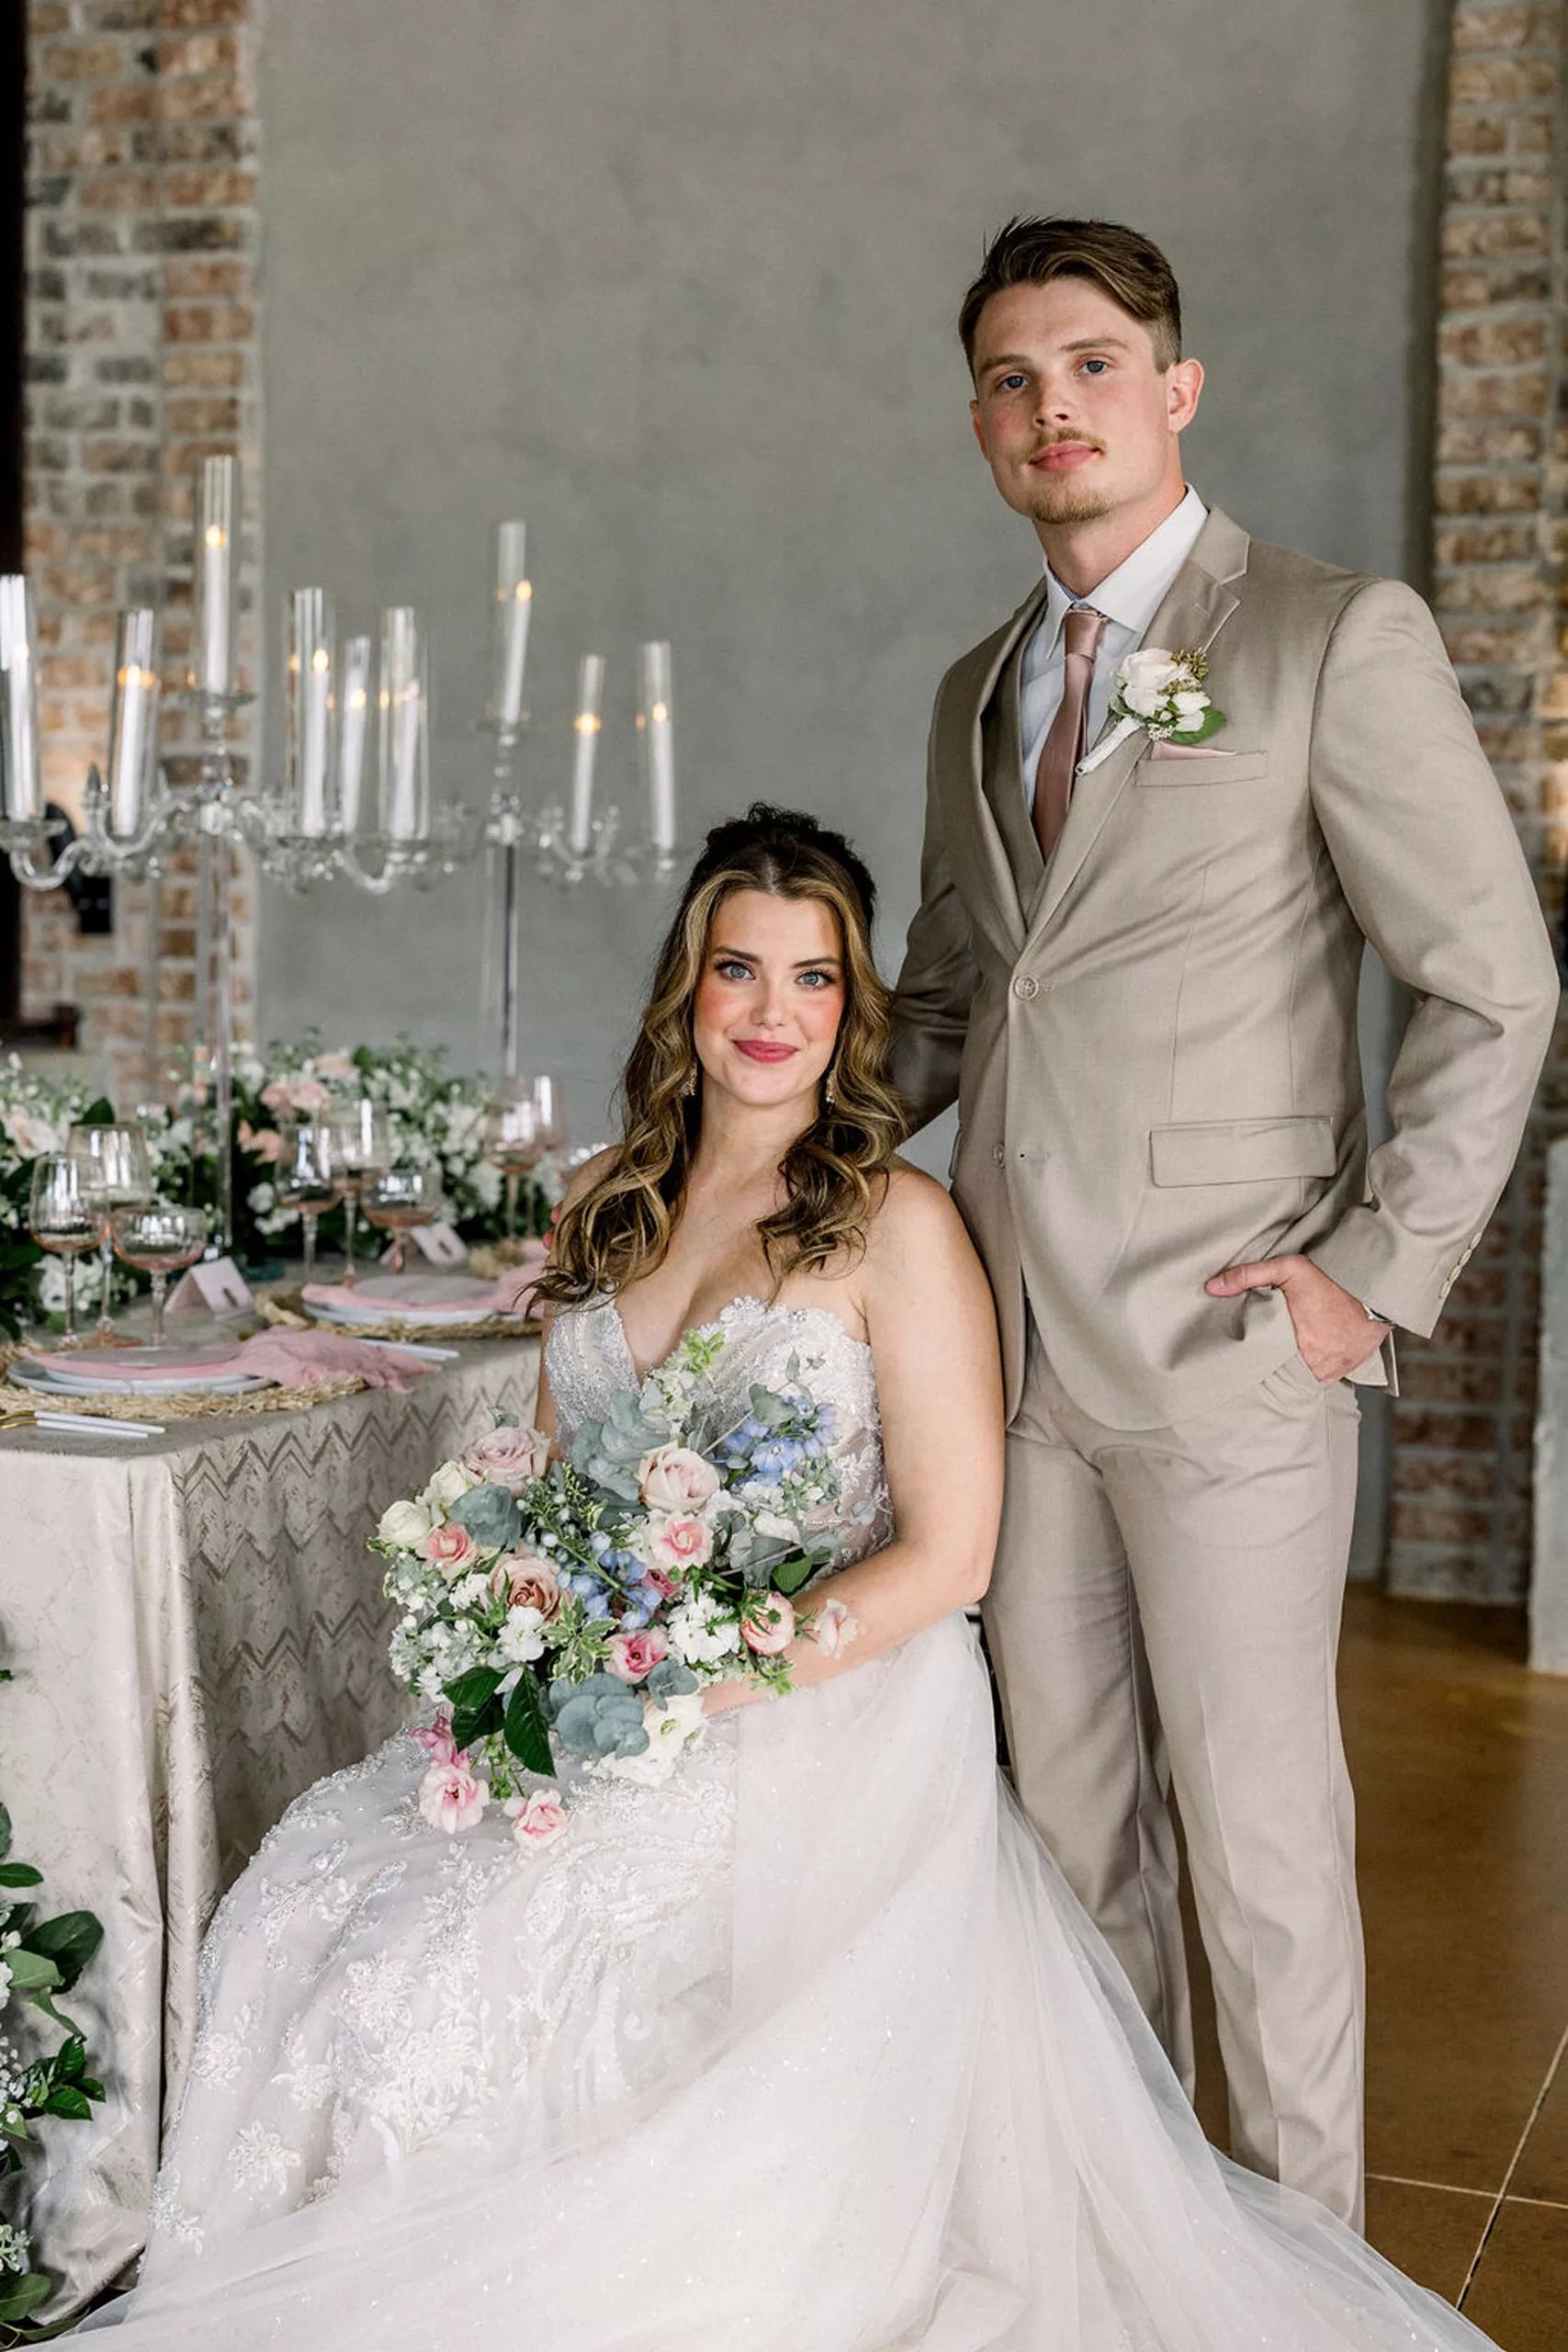 A bride in an embroidered dress sits in a chair at a reception table with her husband in a beige suit standing standing behind her with a hand on her shoulder at an iron manor wedding